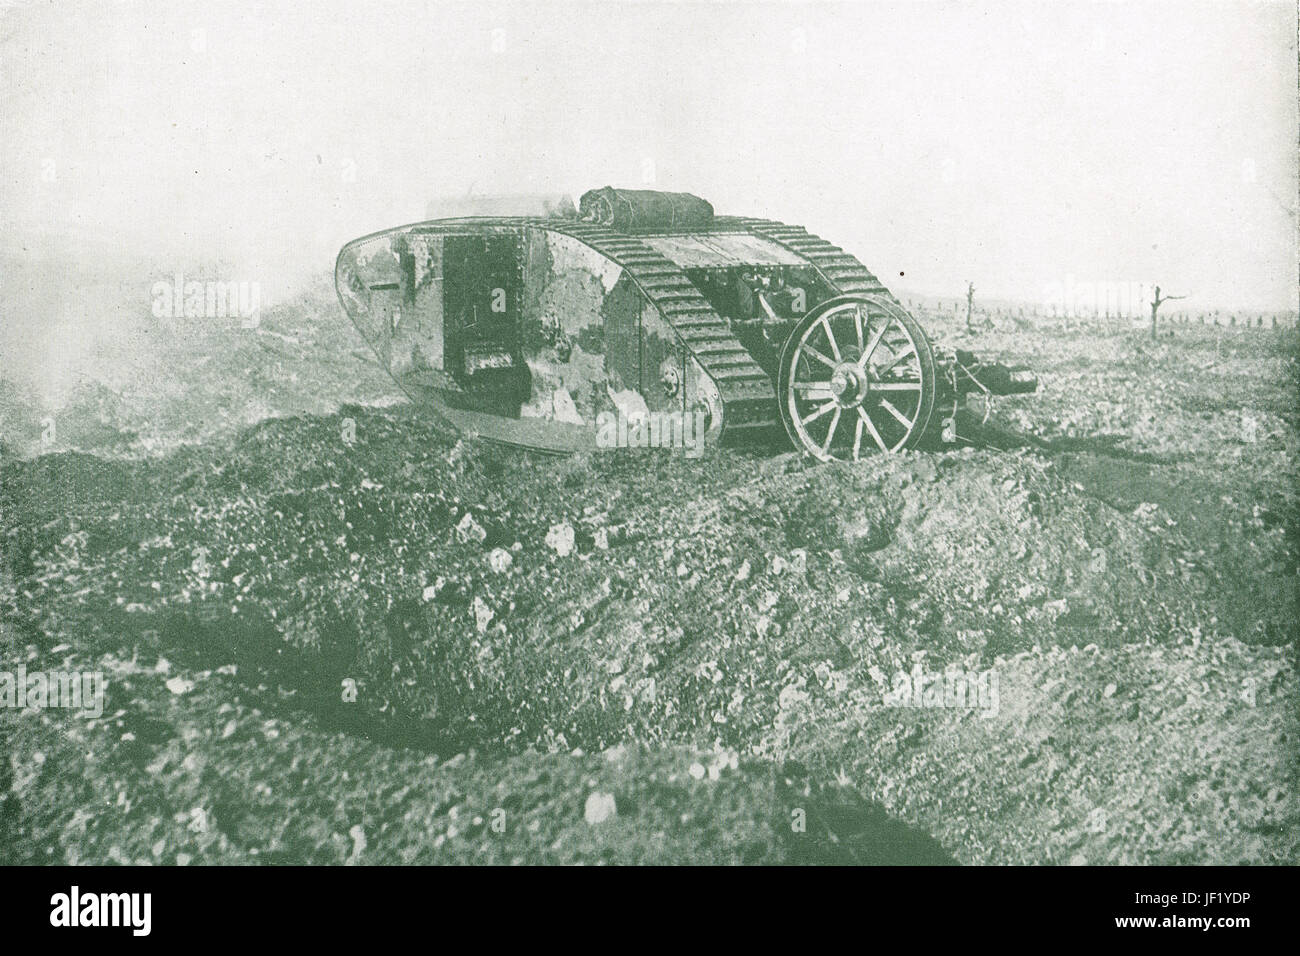 Tank at the Battle of the Somme, 1916 Stock Photo